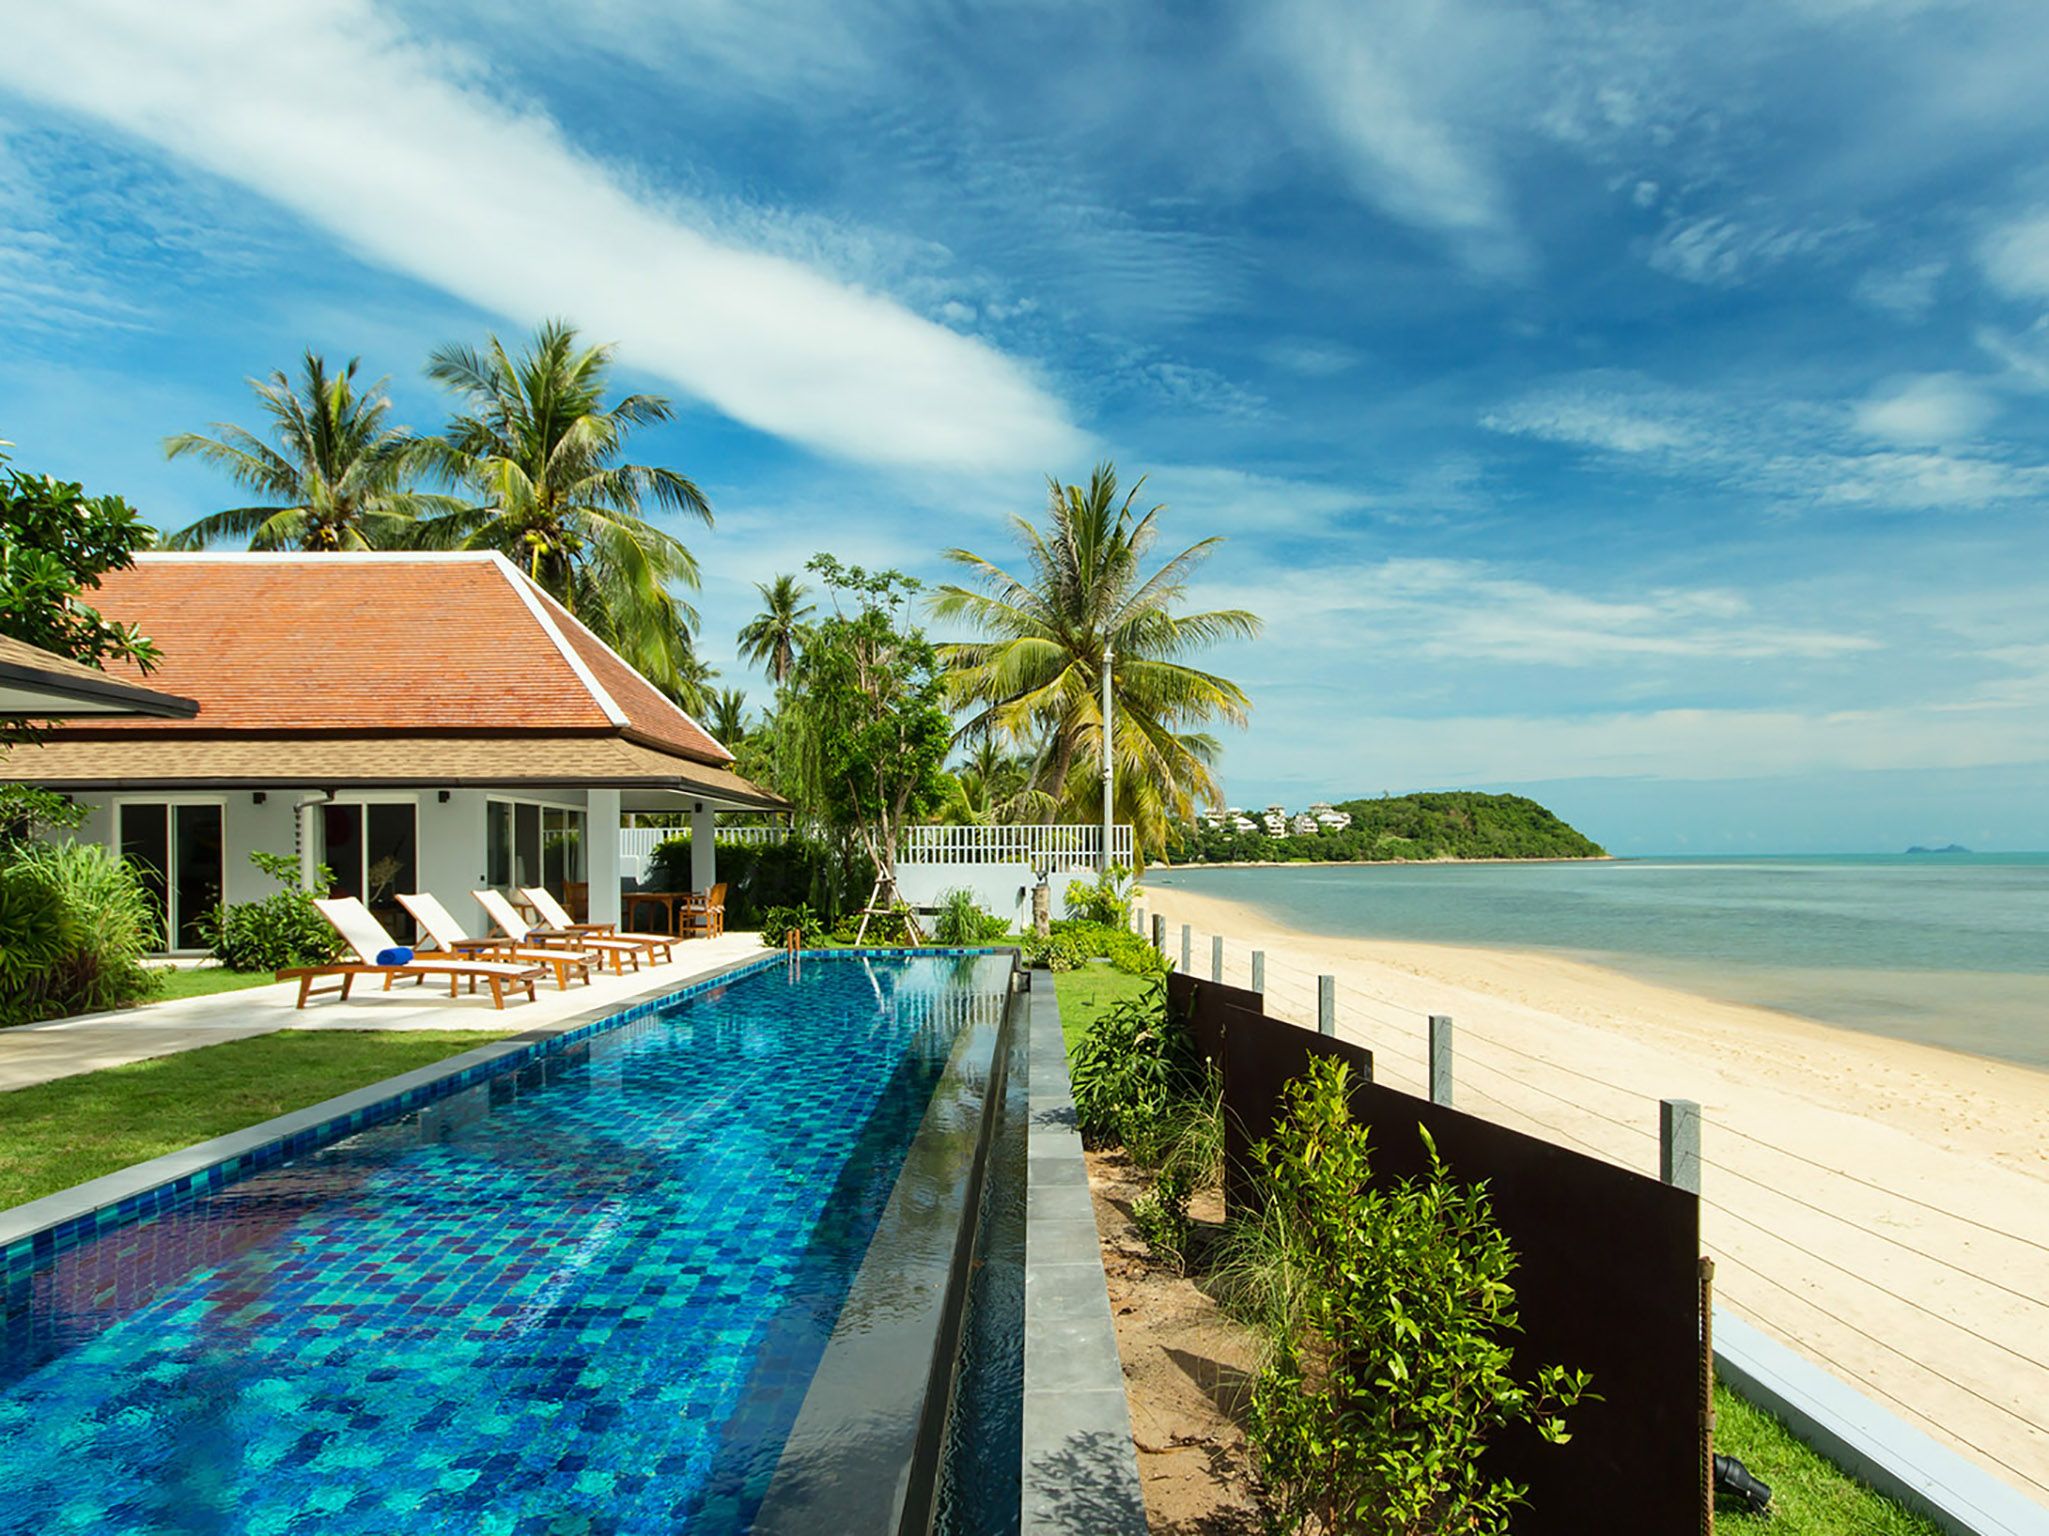 Baan Dalah - Tranquil location to relax